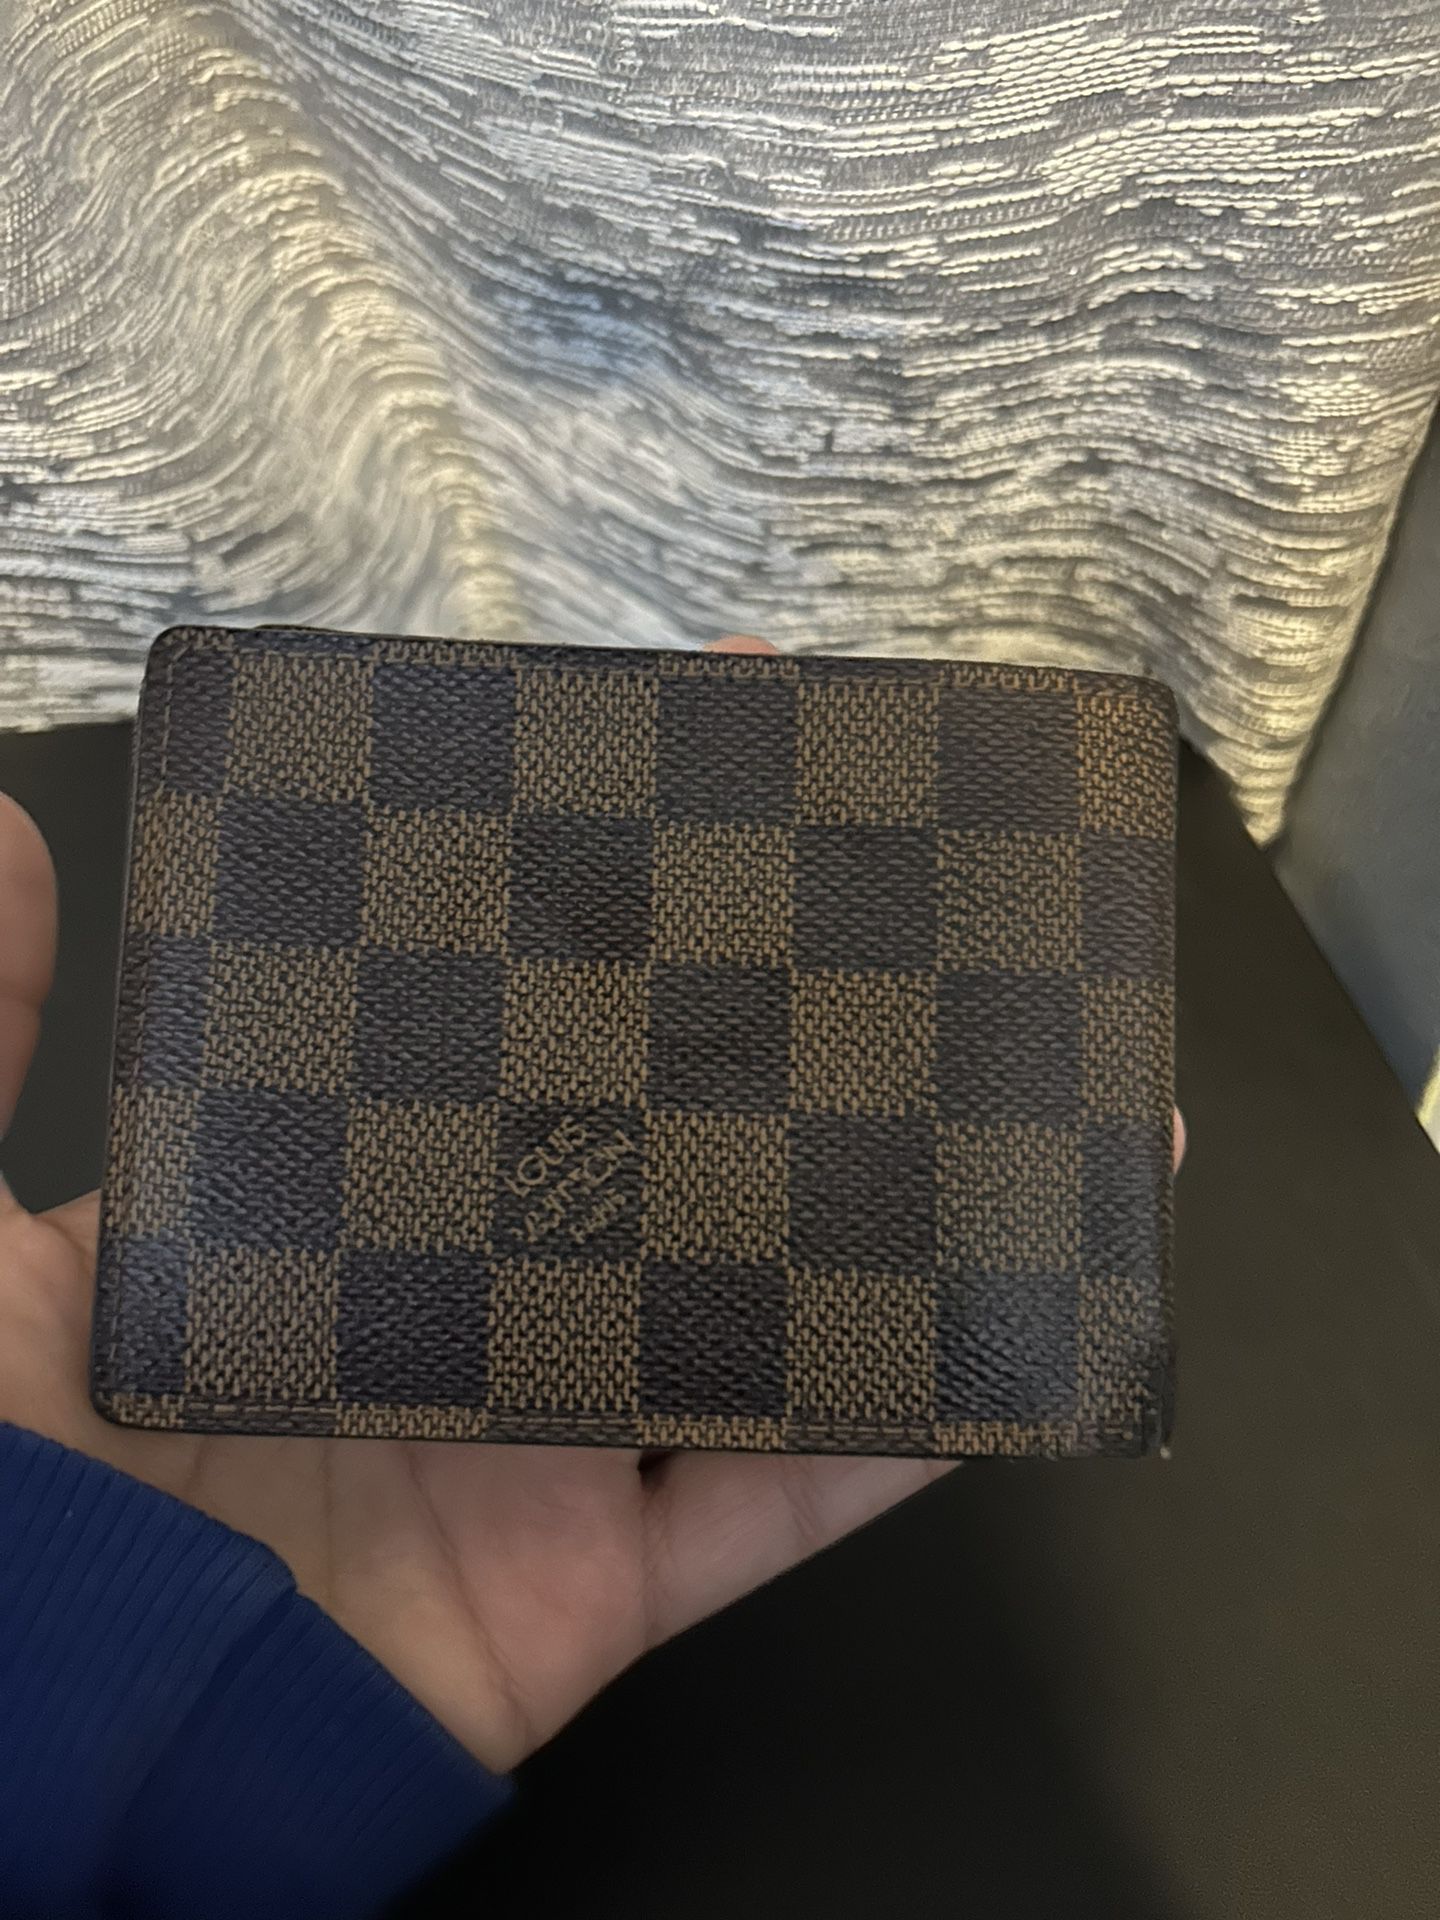 Louis Vuitton Wallet for Sale in Federal Way, WA - OfferUp